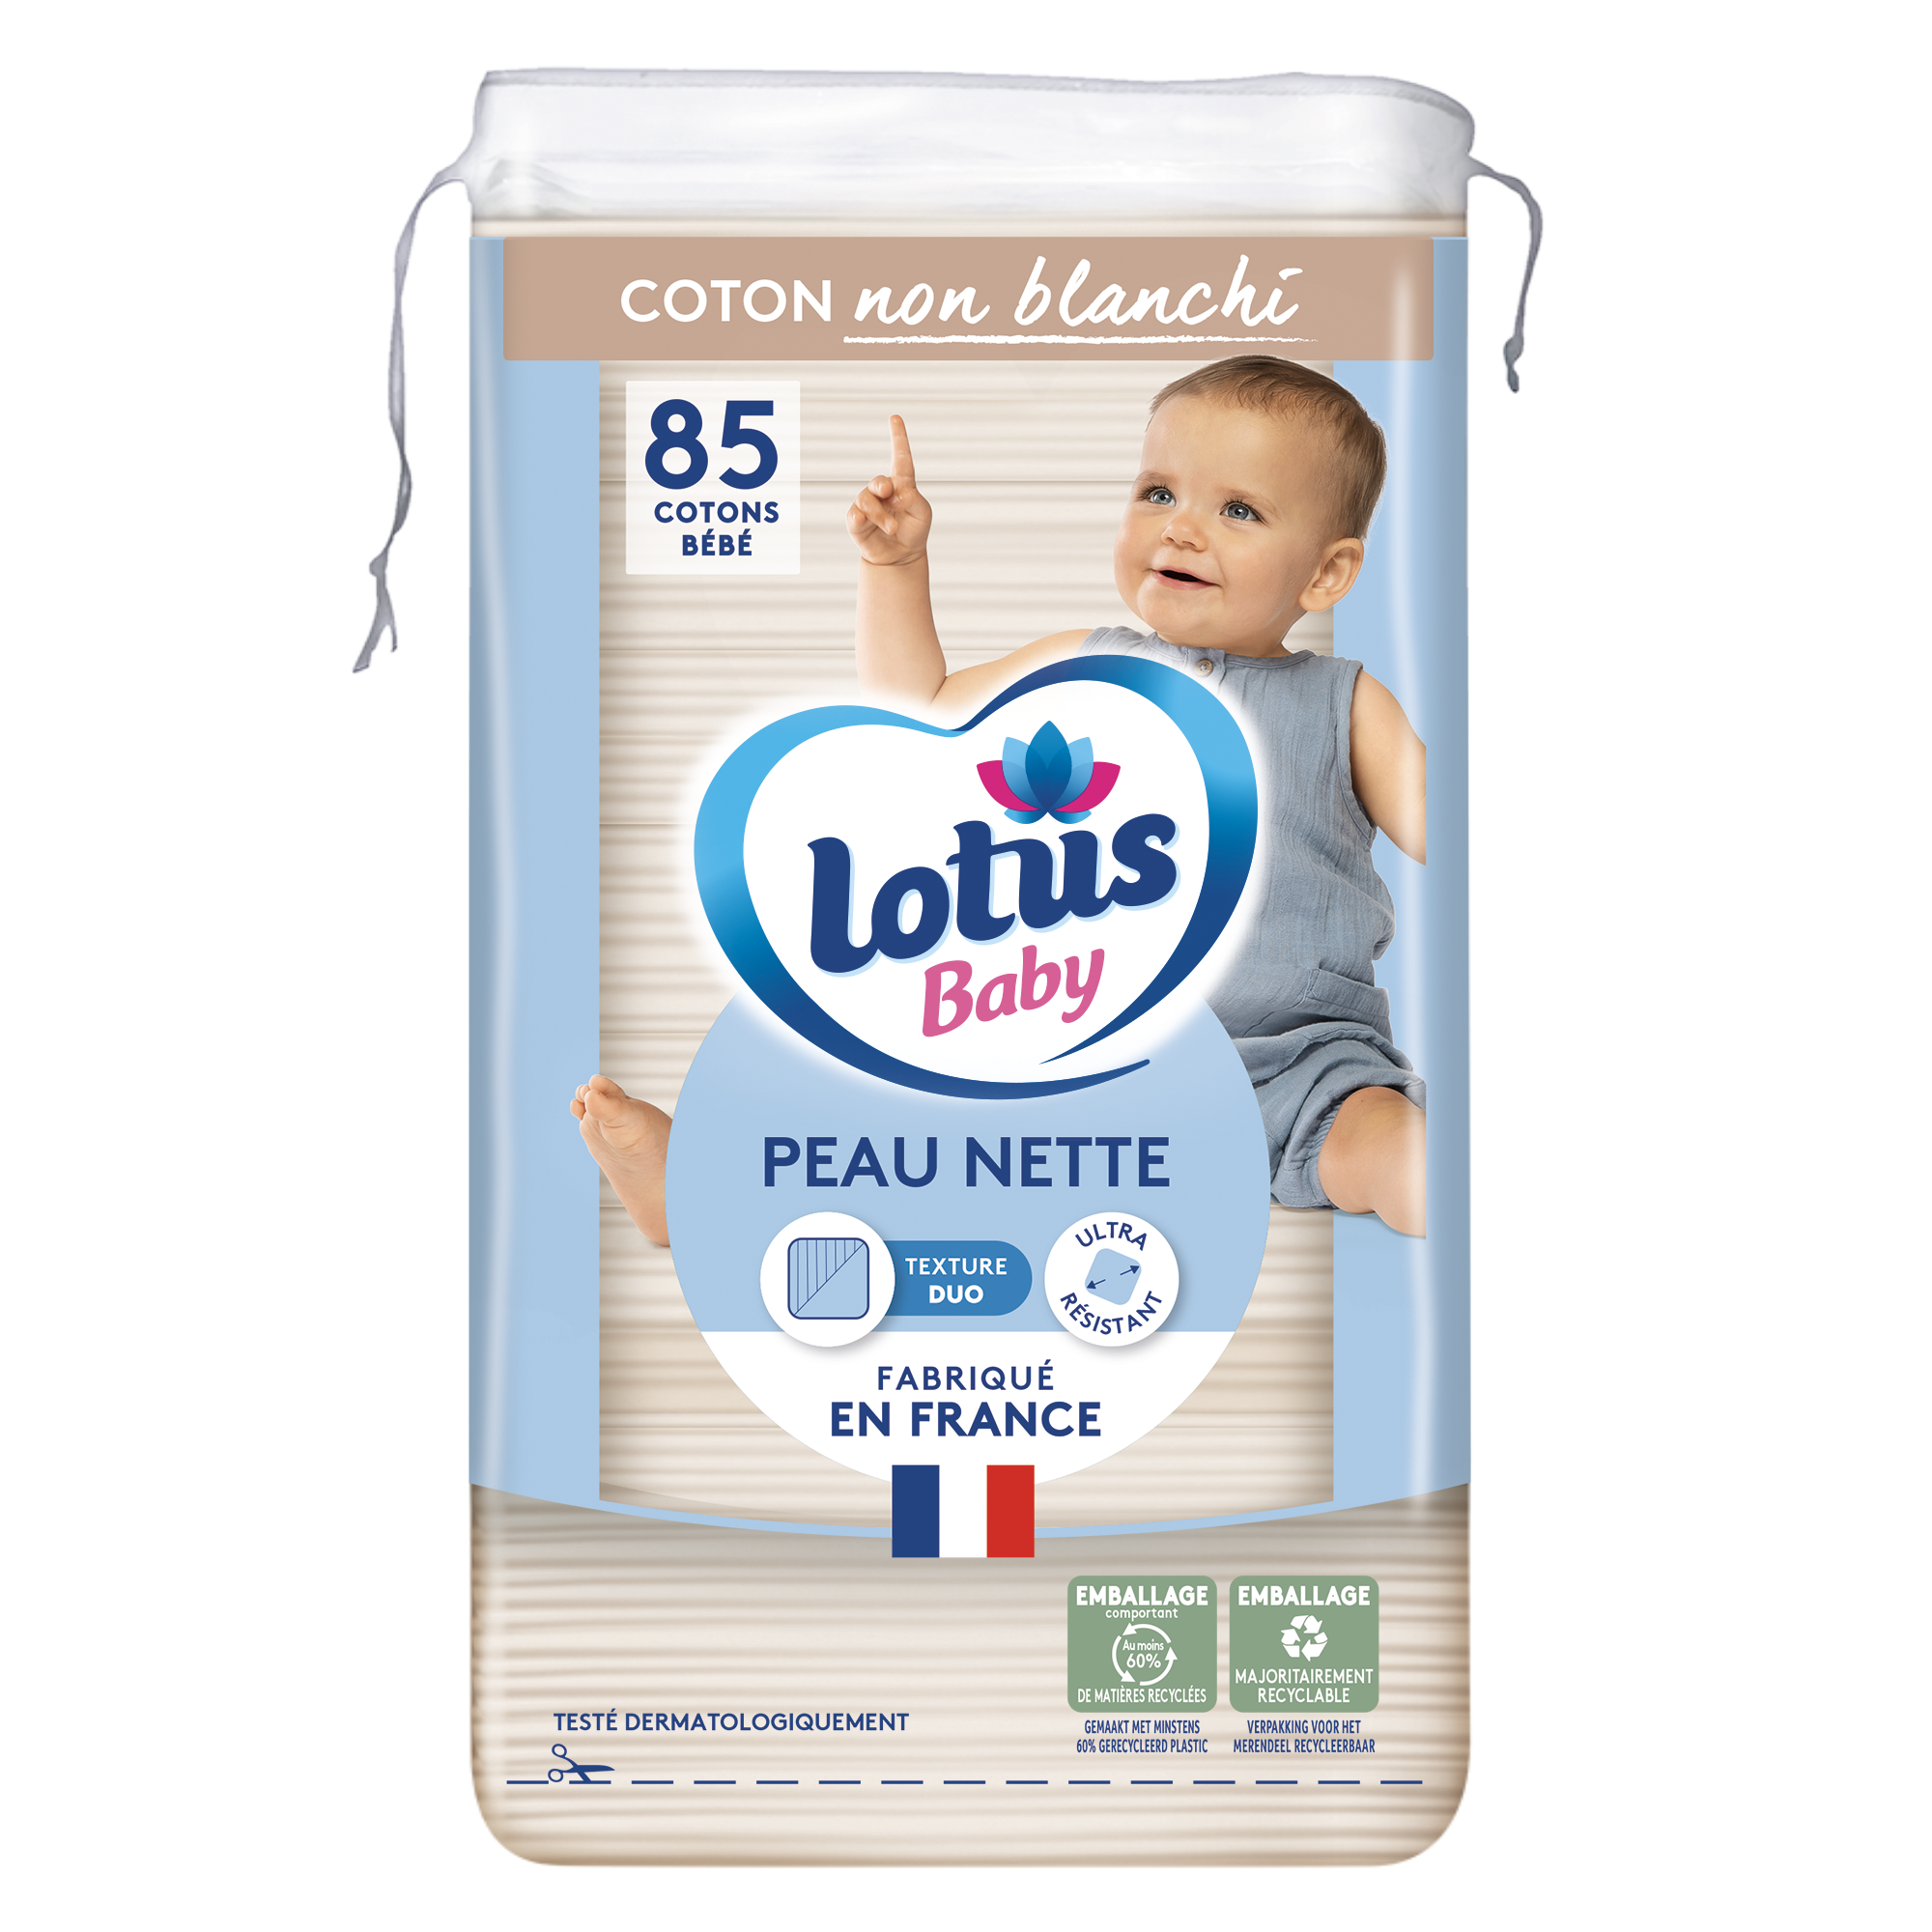 Lotus couches taille 5 4 cartons - Lotus Baby